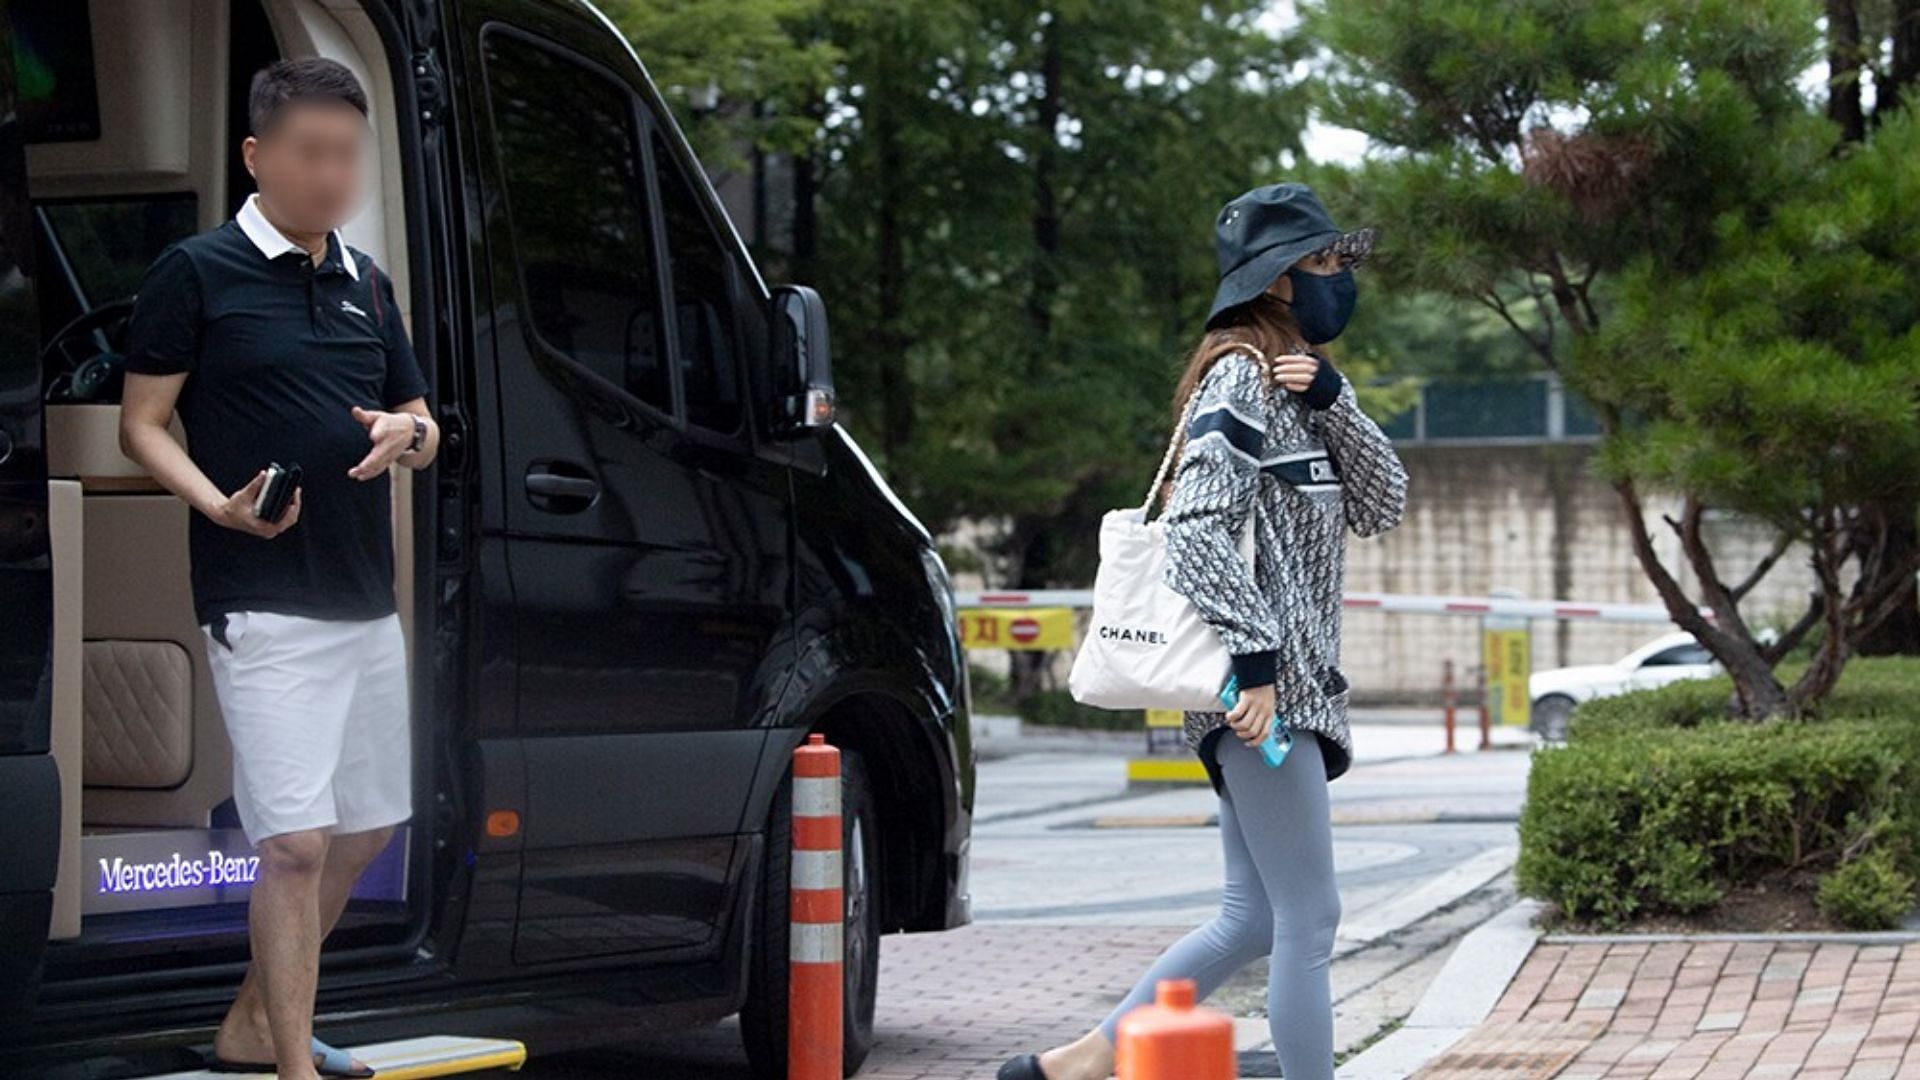 The couple getting out of the car together (Image via Dispatch)